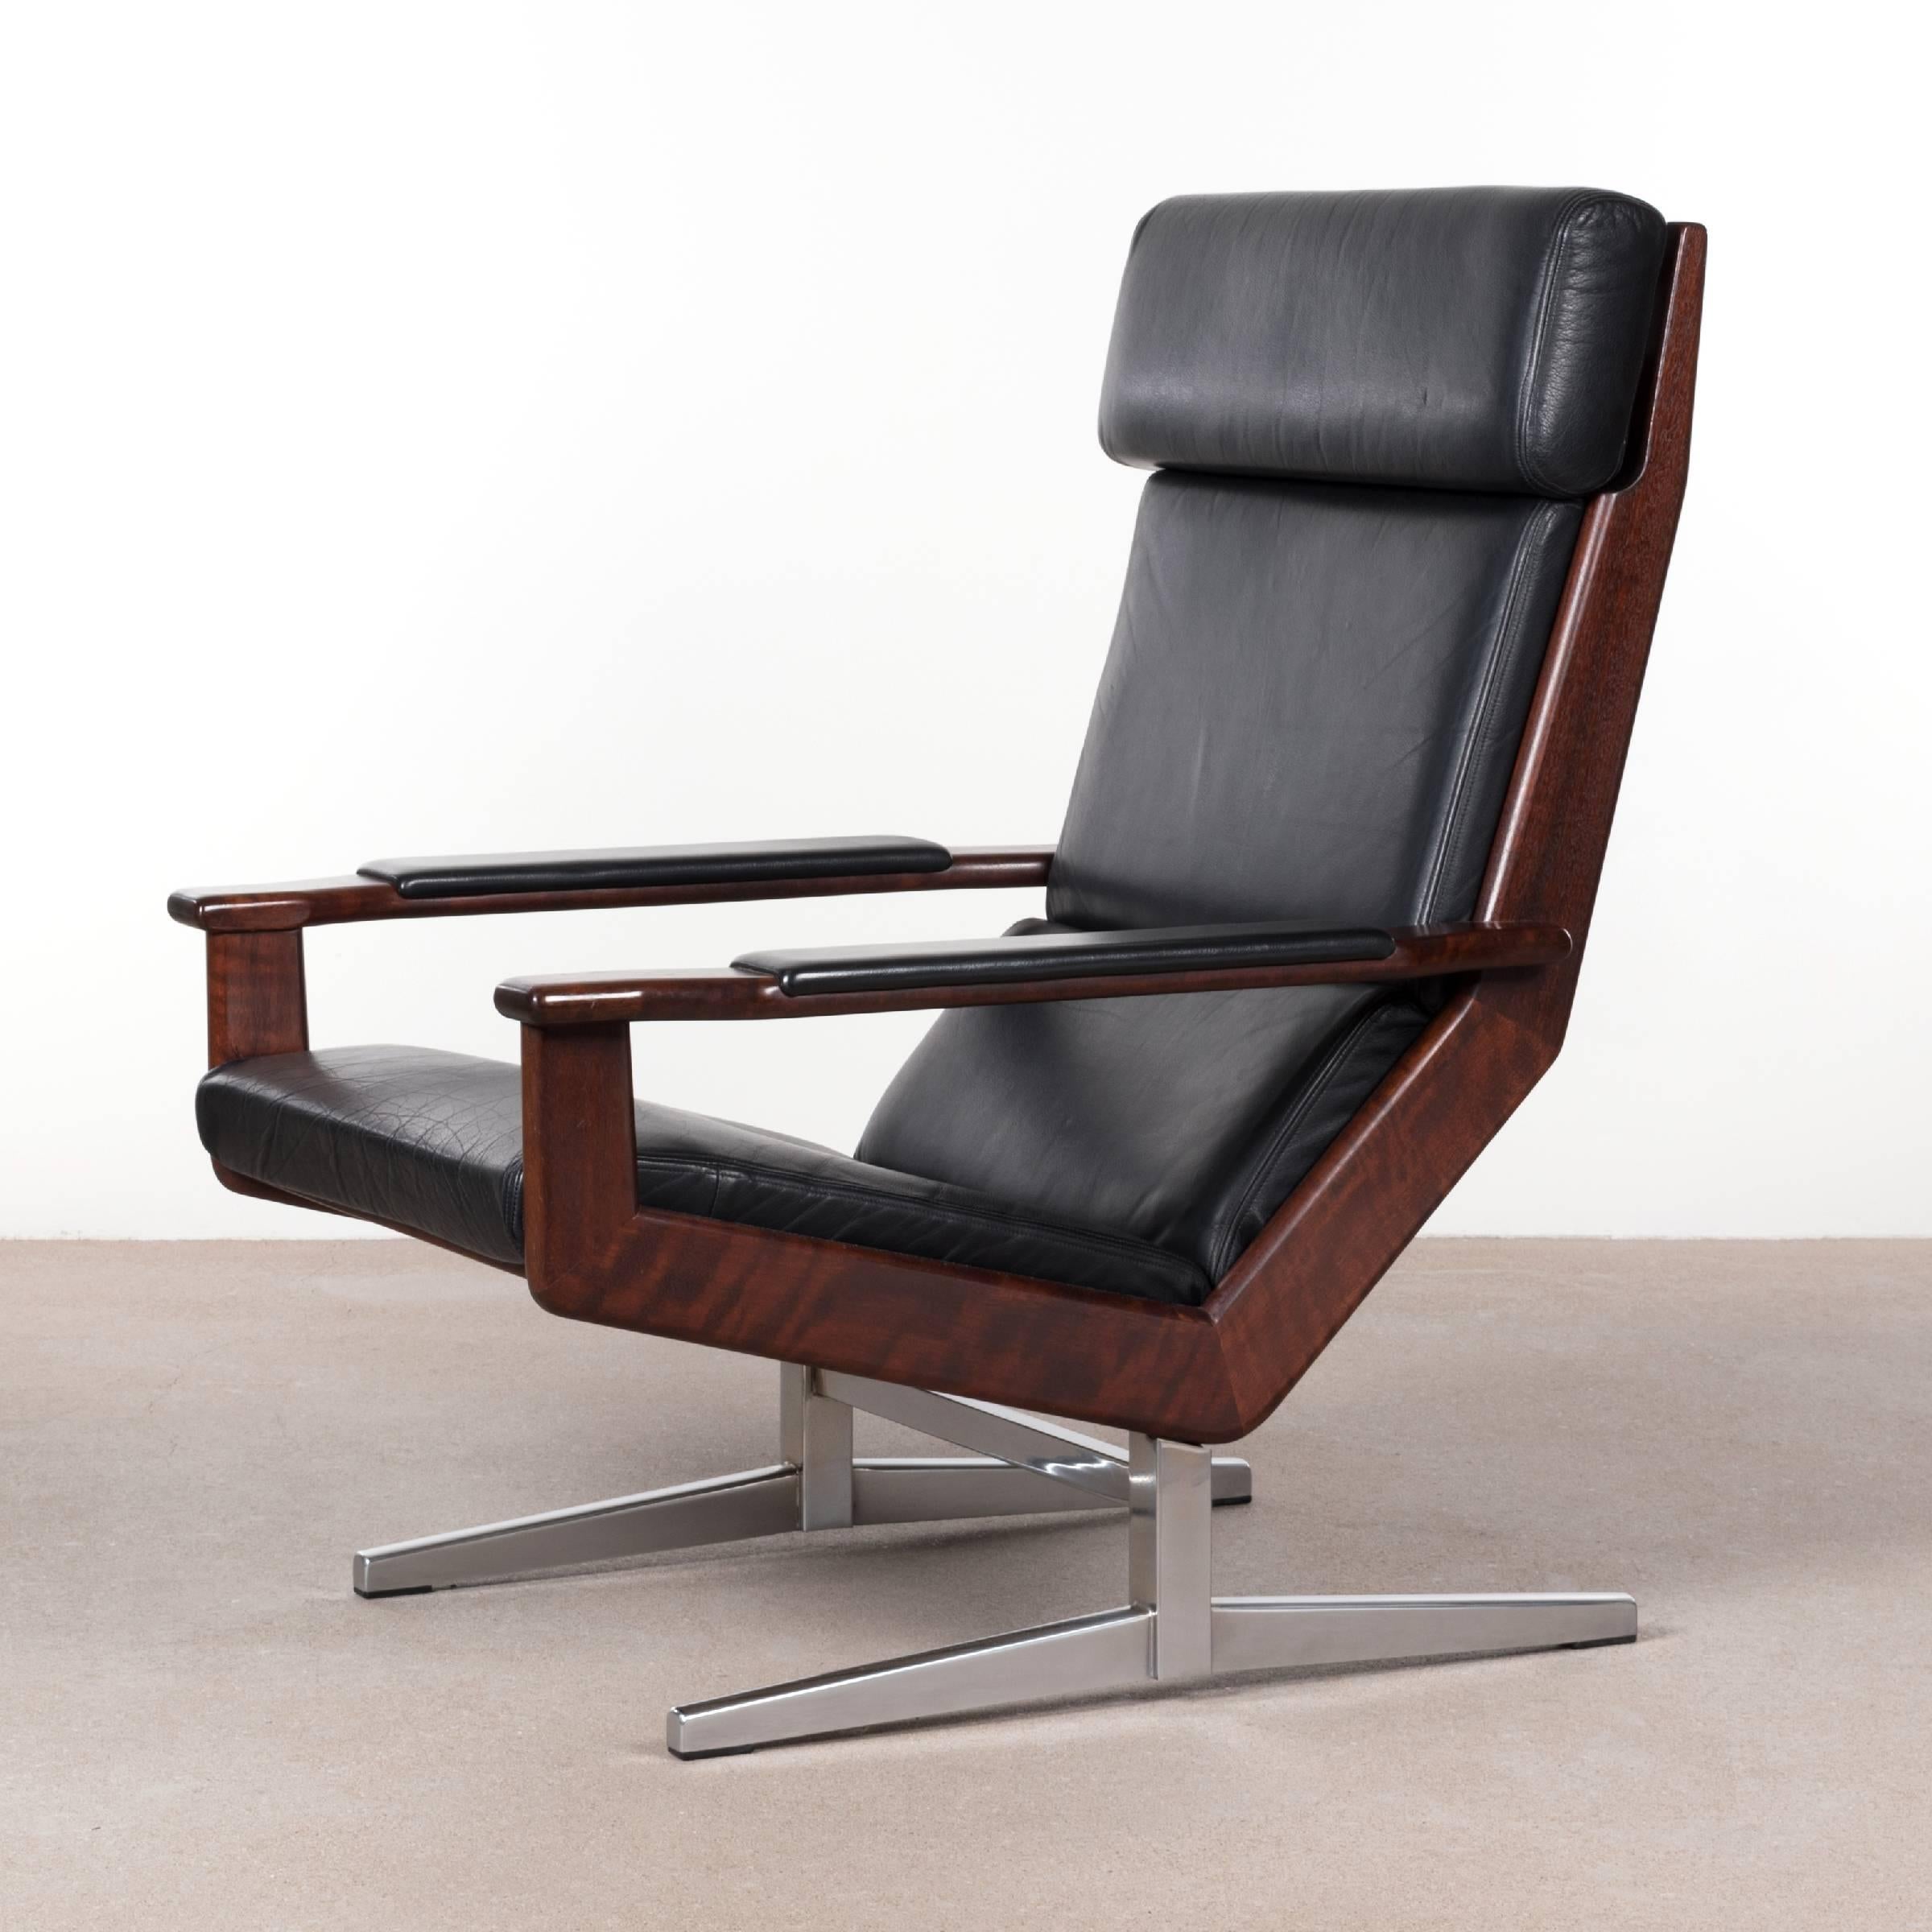 Elegant and rare leather Lotus lounge chair by Rob Parry. Chrome-plated base, black leather cushions and rosewood frame / armrests. All in very good original condition with renewed webbing.

Free shipping for European destinations!

We strive